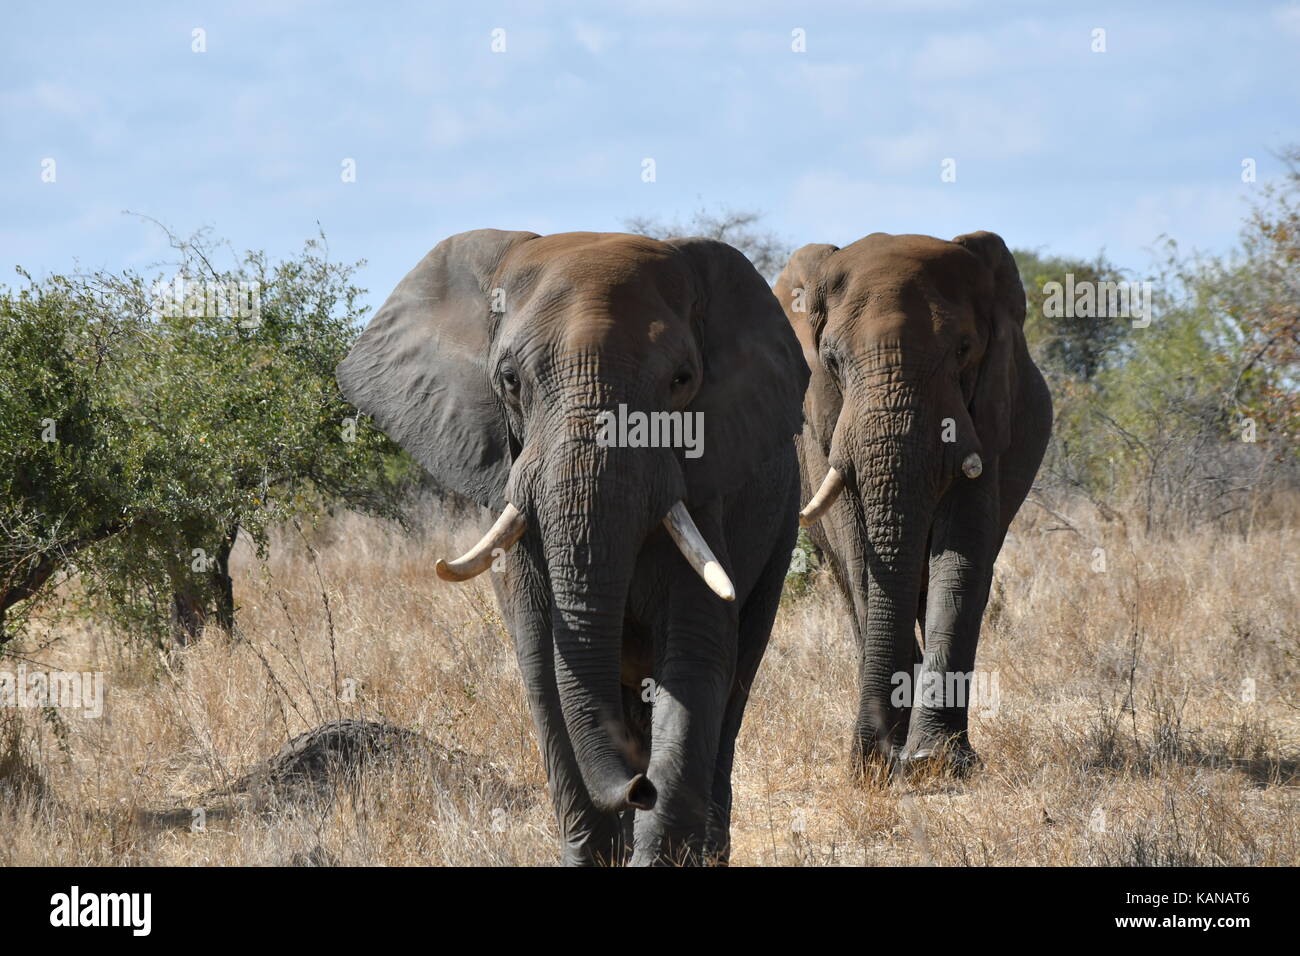 Adult elephant walking in Kruger National Park, South Africa Stock Photo